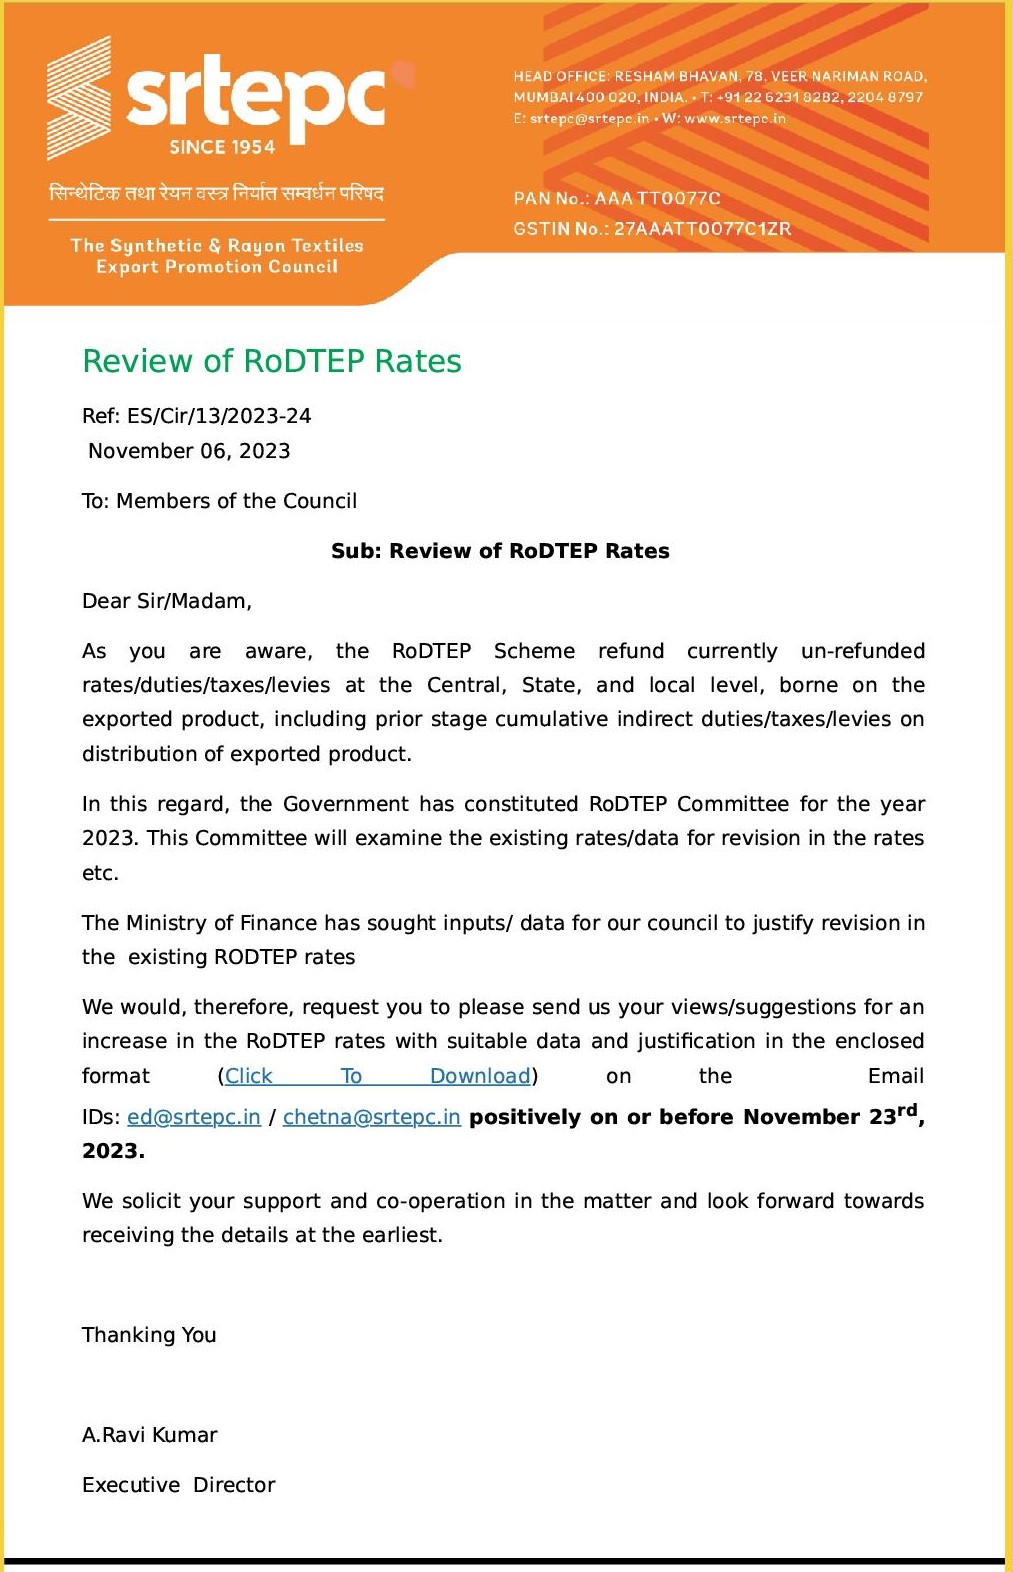 Review of RoDTEP Rates